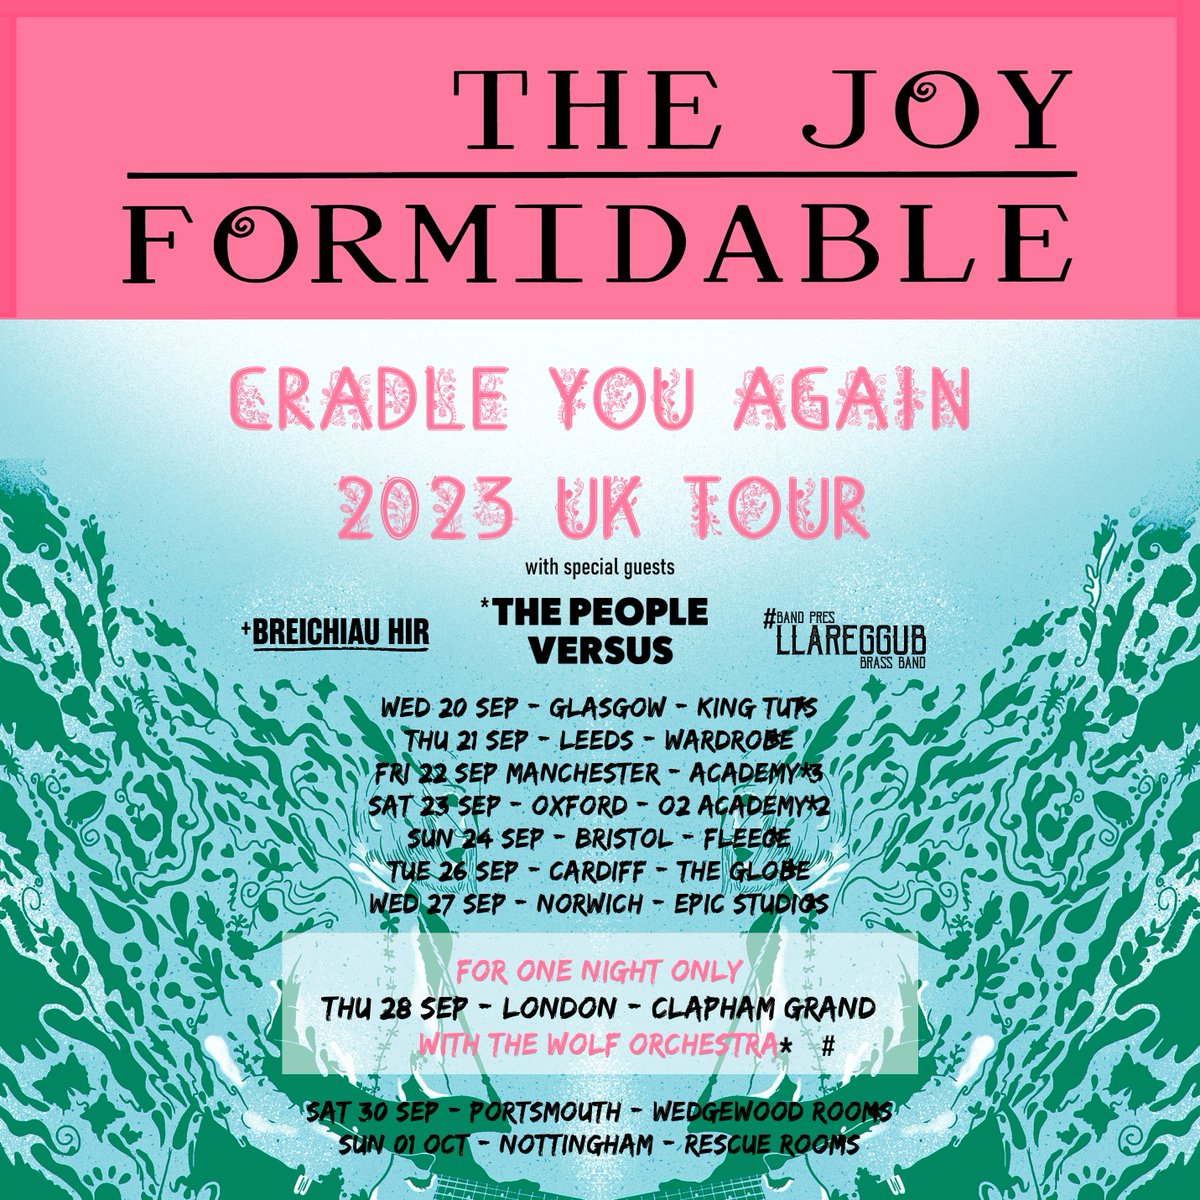 We're going on tour with The Joy Formidable! See you on the road!